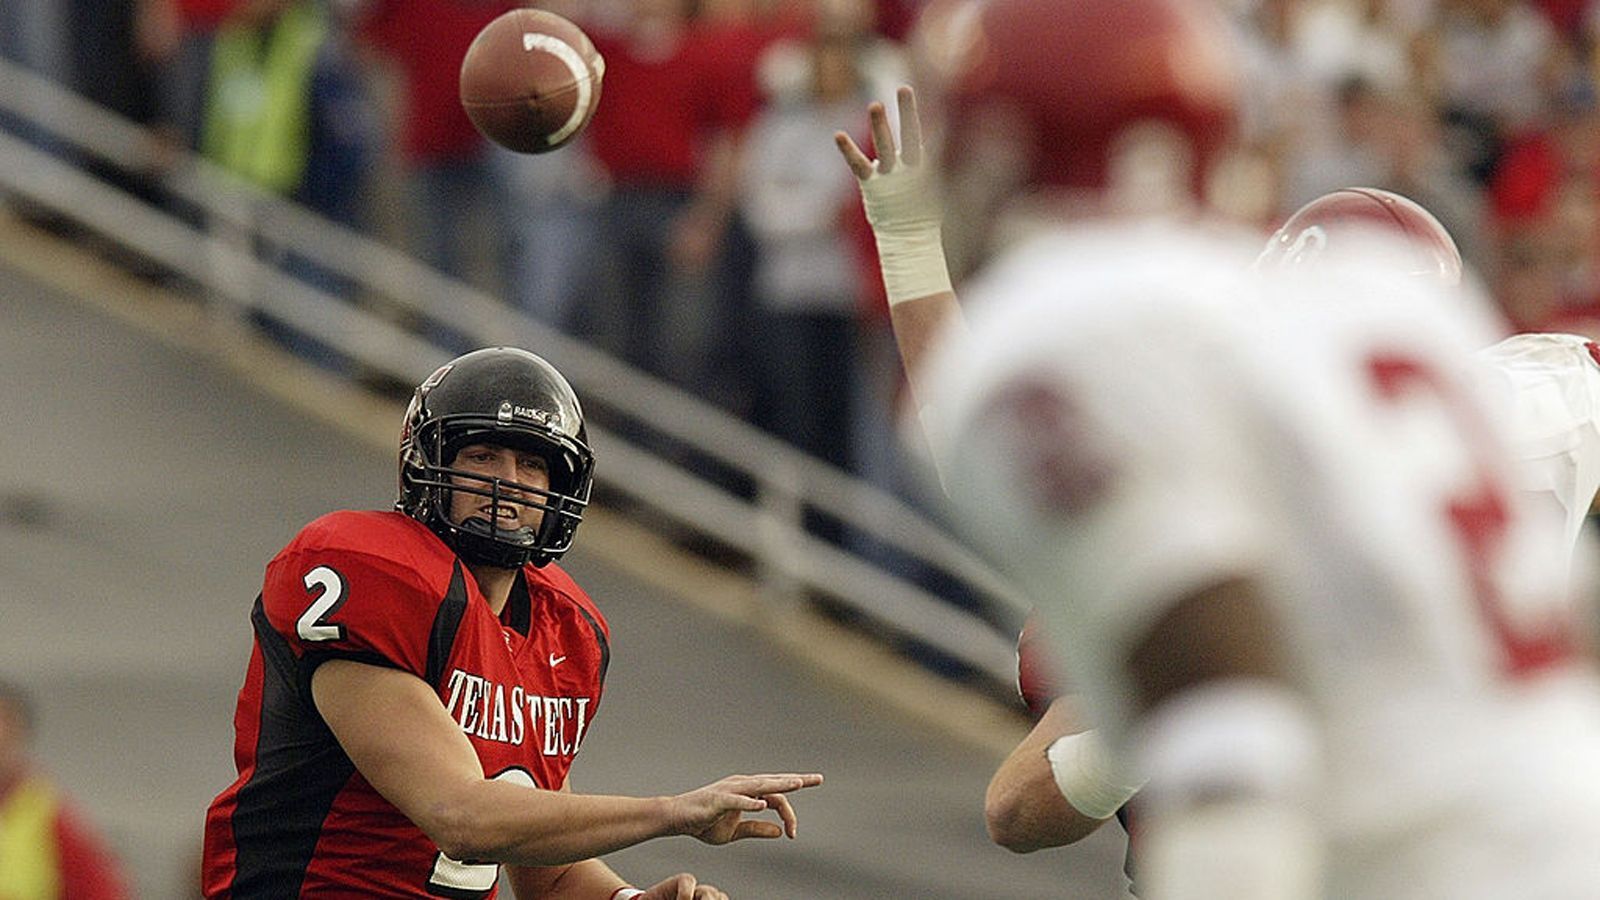 
                <strong>Die meisten Yards in einer Saison </strong><br>
                B. J. Symons (Texas Tech Red Raiders)2003: 5,976 Yards ( 5,833 Passing Yards, 143 Rushing Yards)
              